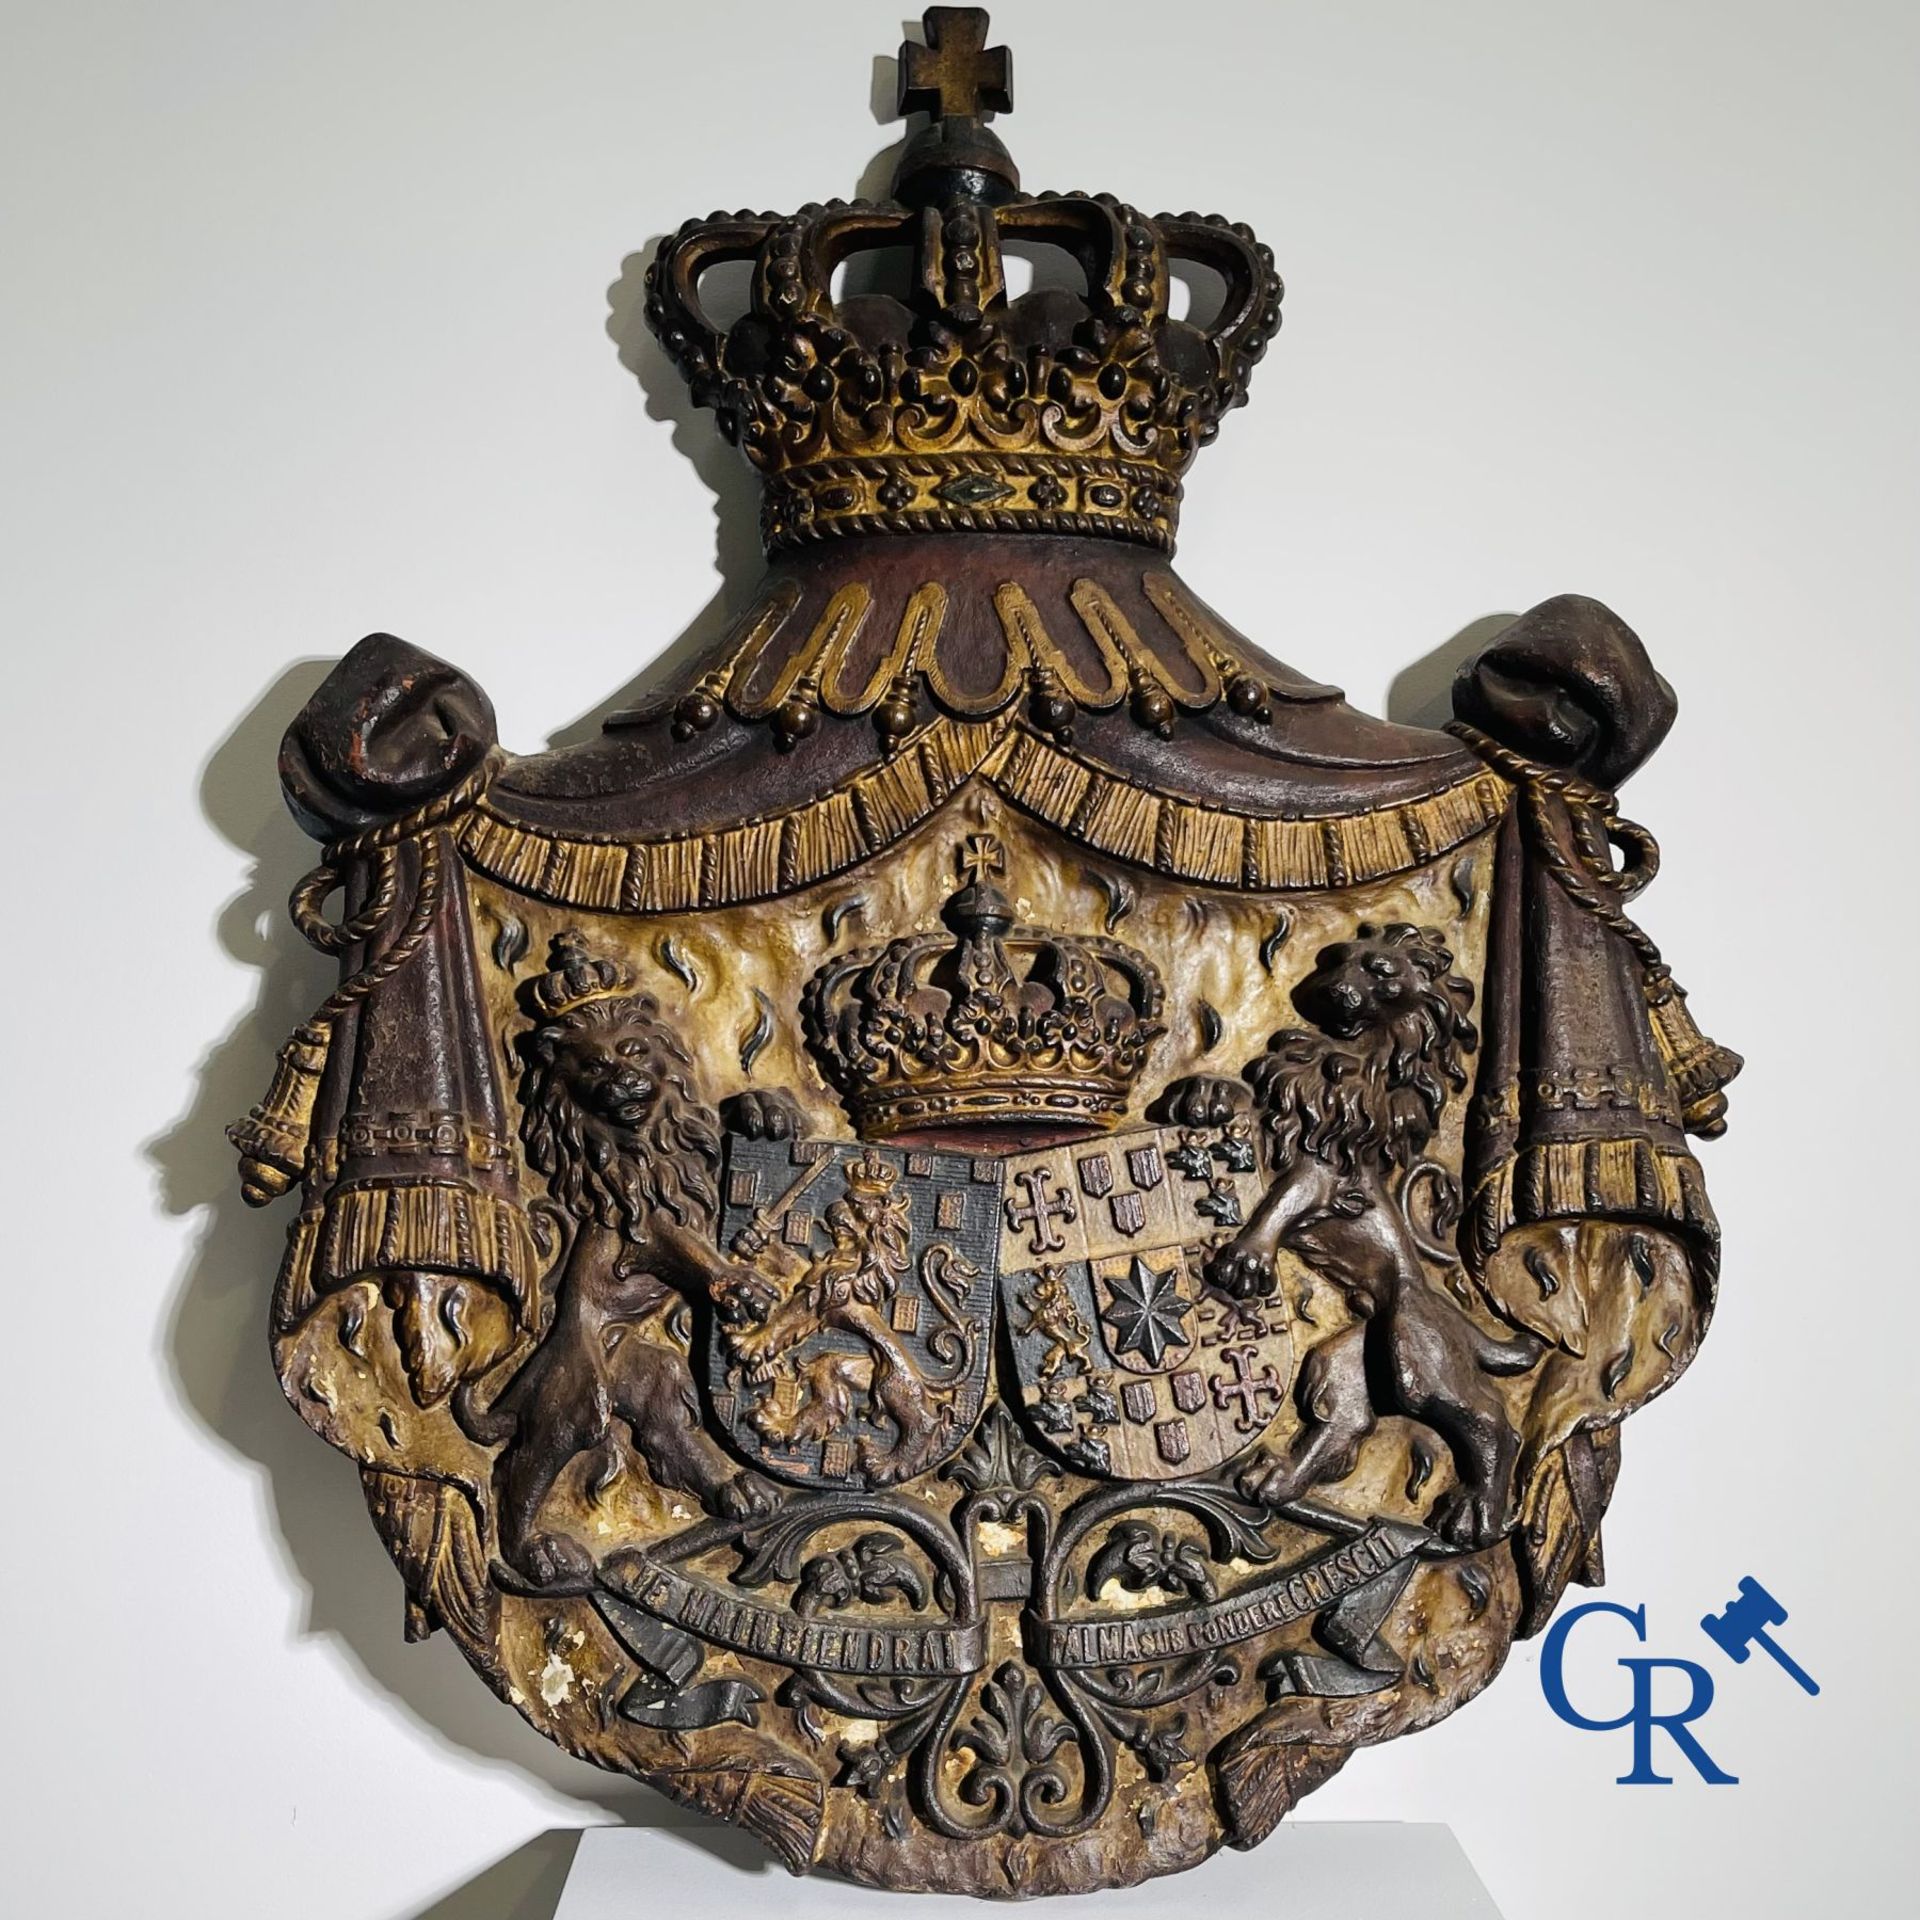 Exceptionally Royal Coat of Arms in dented and polychrome cast iron. the Netherlands, 19th century. - Image 13 of 13